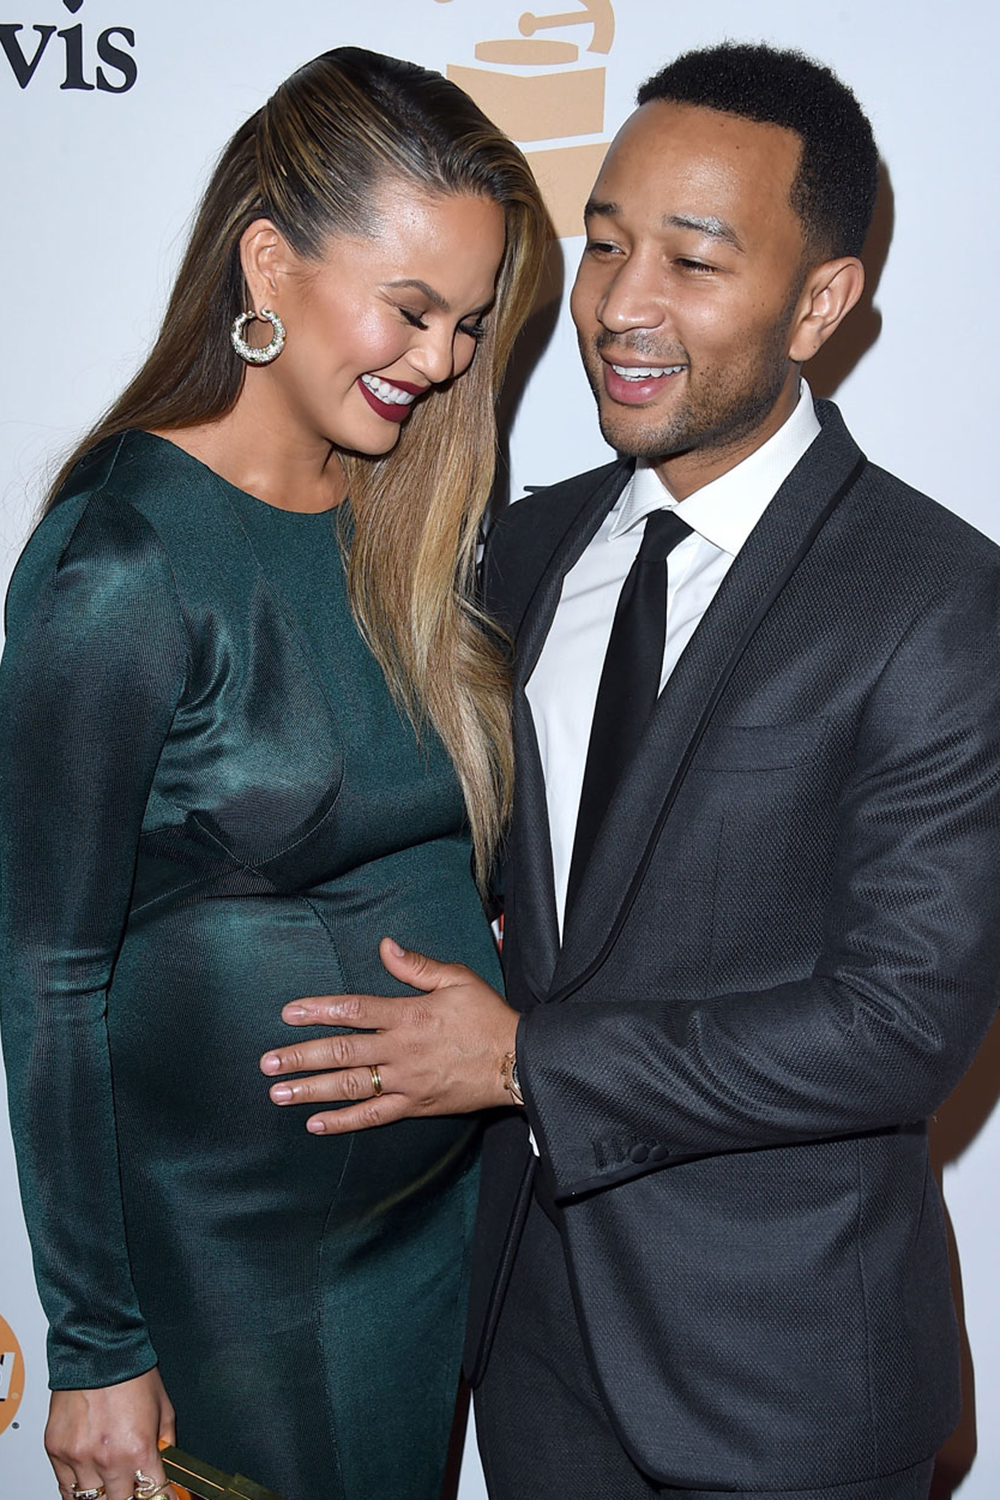 After meeting on the set of his music video Stereo in 2007, Chrissy Teigen and John Legend started dating. The couple made it official in 2011 with a wedding in Lake Como, Italy and now have one daughter Luna who was born in 2015.